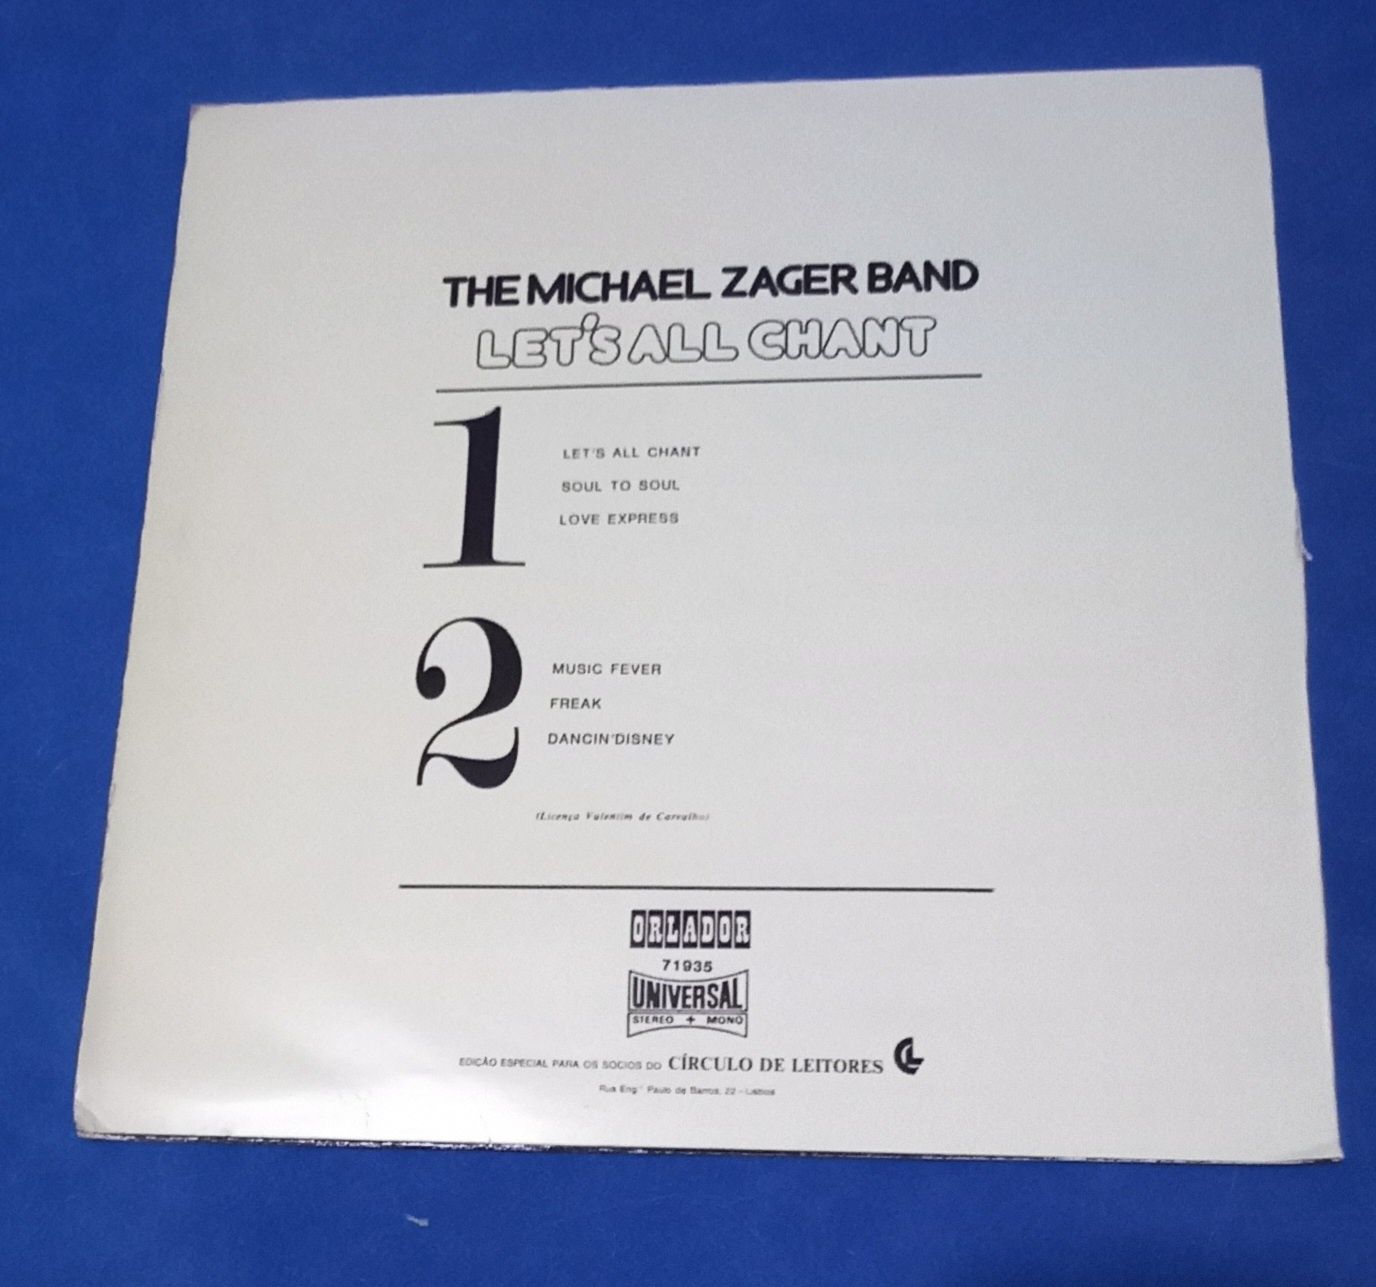 Vinil LP, The Michael Zager Band," Let'sAll Chant"